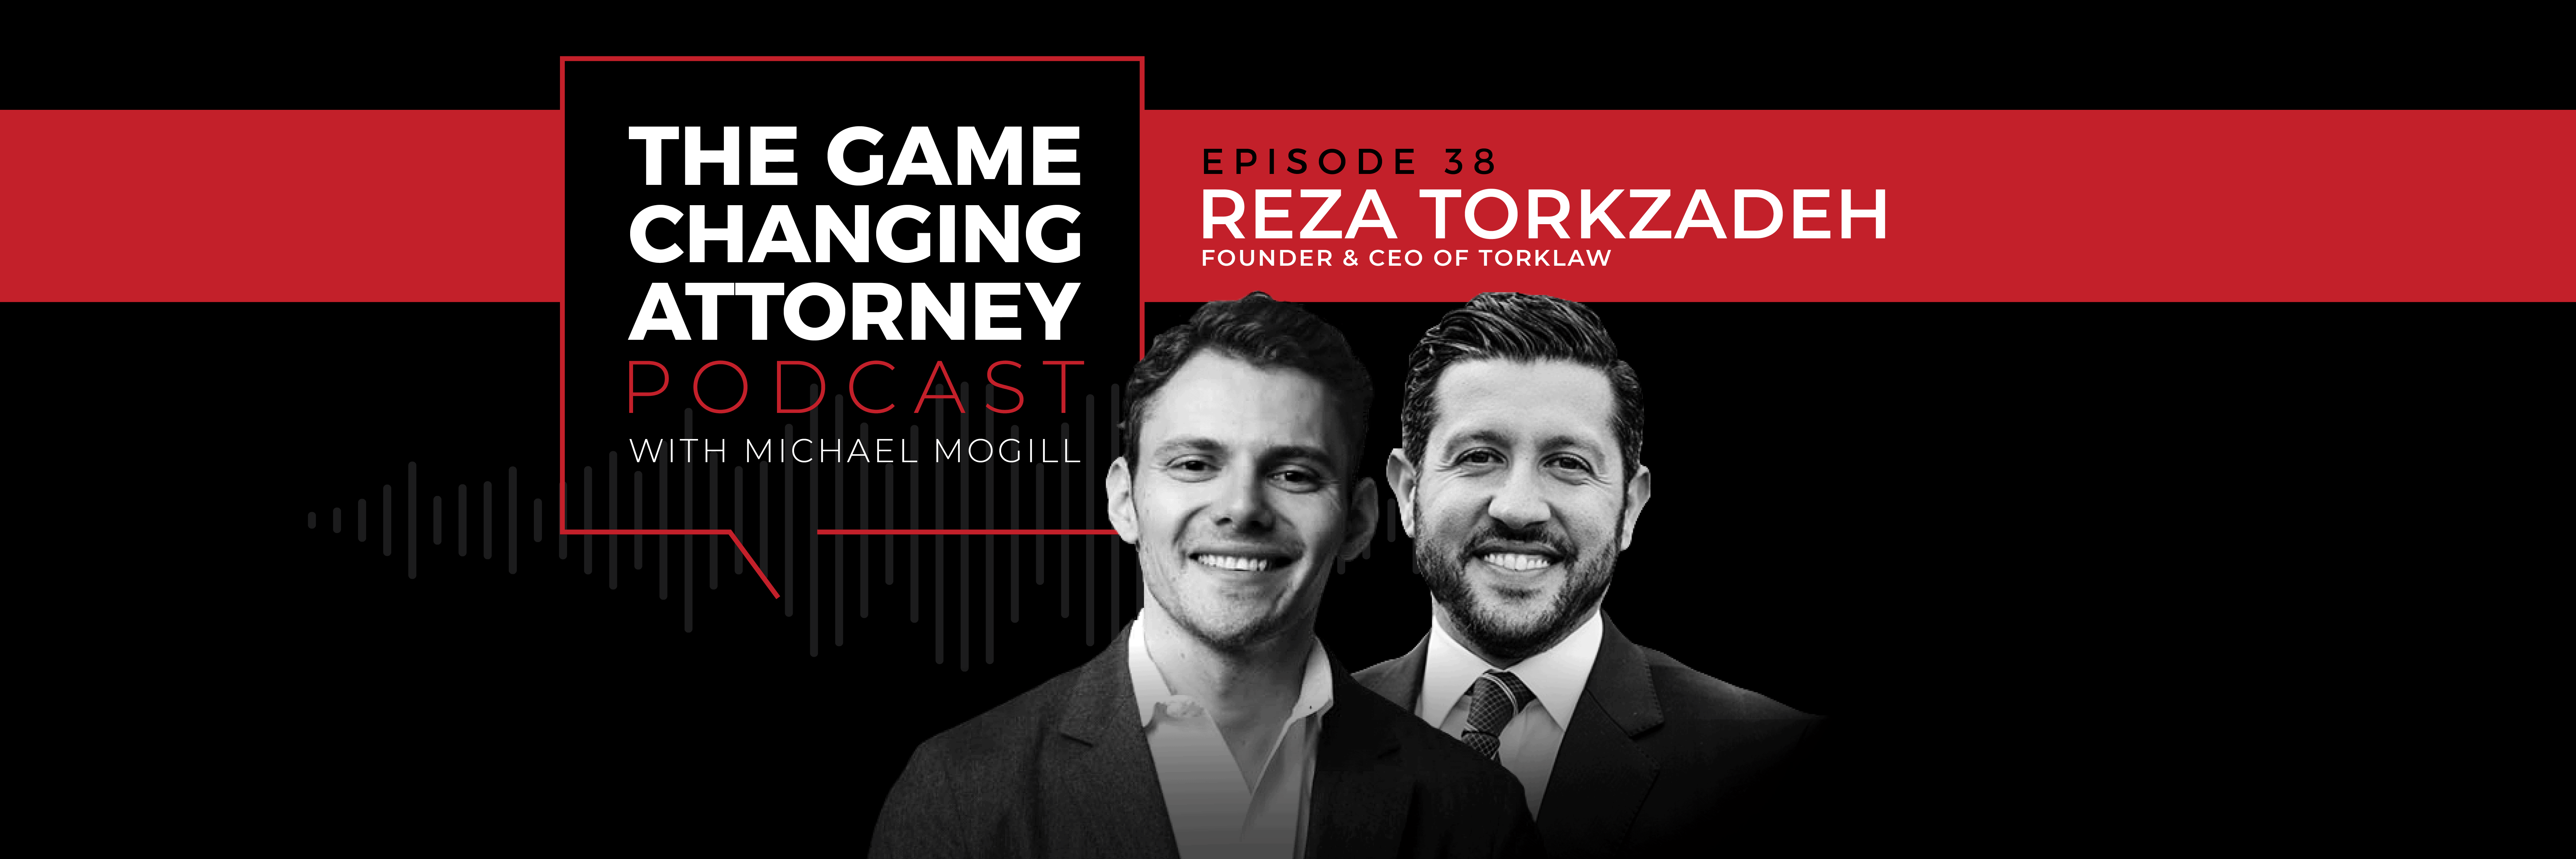 Reza Torkzadeh - The Game Changing Attorney Podcast - Desktop